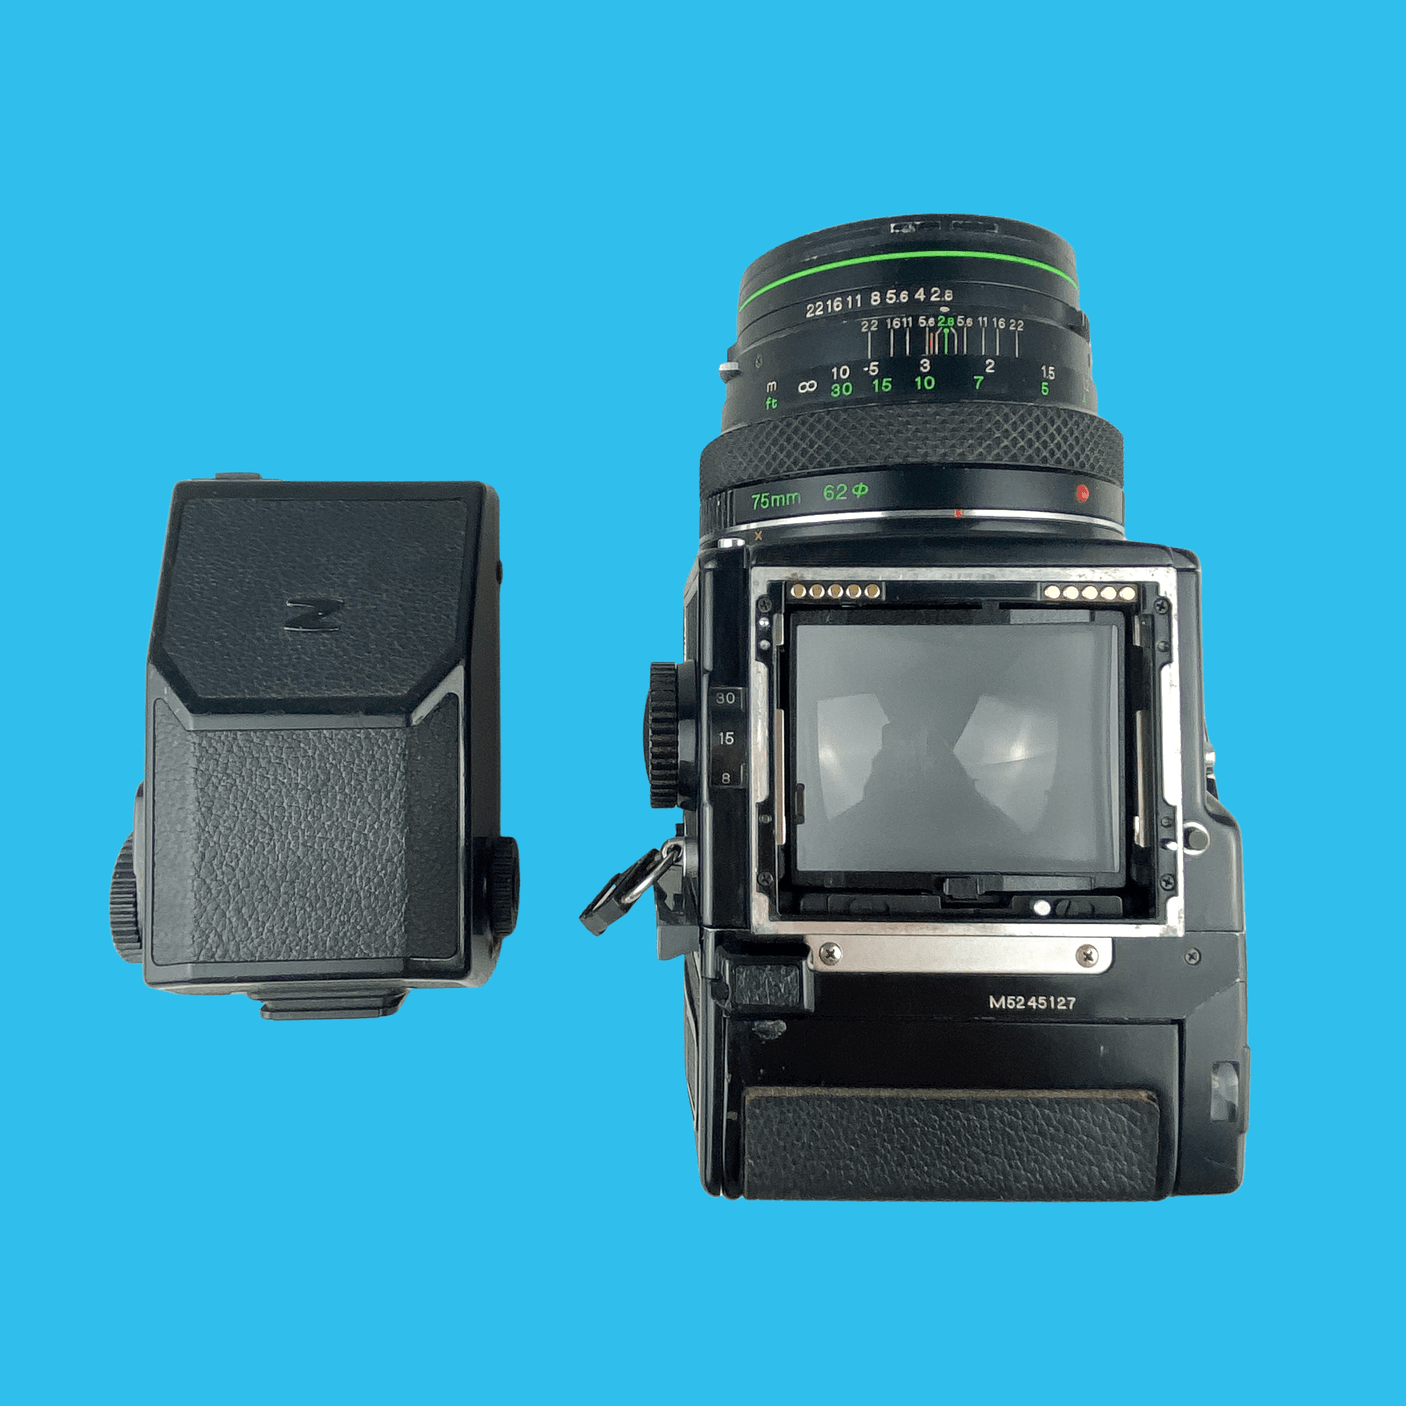 Bronica ETRS With AE II Prism and 75mm F2.8 Lens. 6X4.5 Medium Format Film Camera